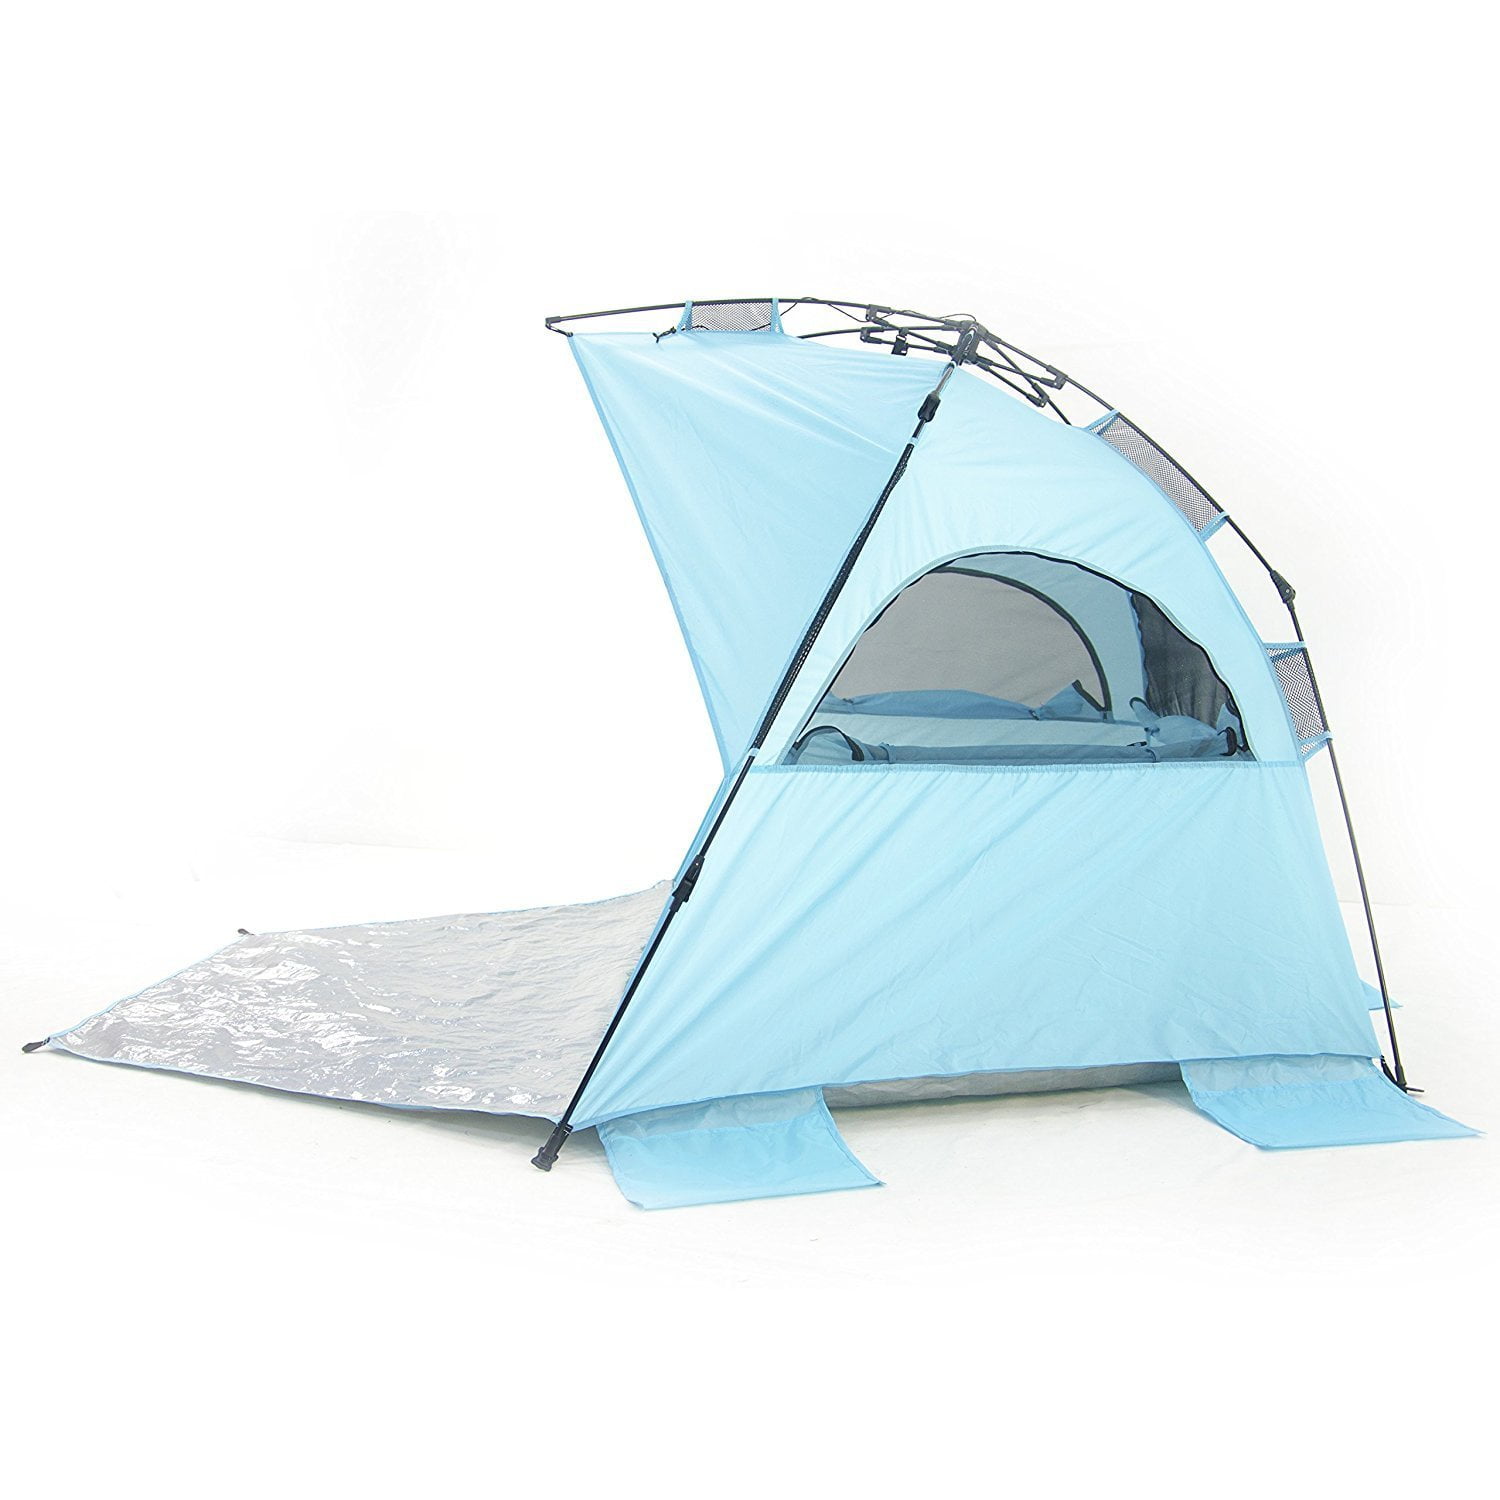 Details about   Portable Beach Tent Sun Shade Shelter Canopy Outdoor Picnic Camping Fishing